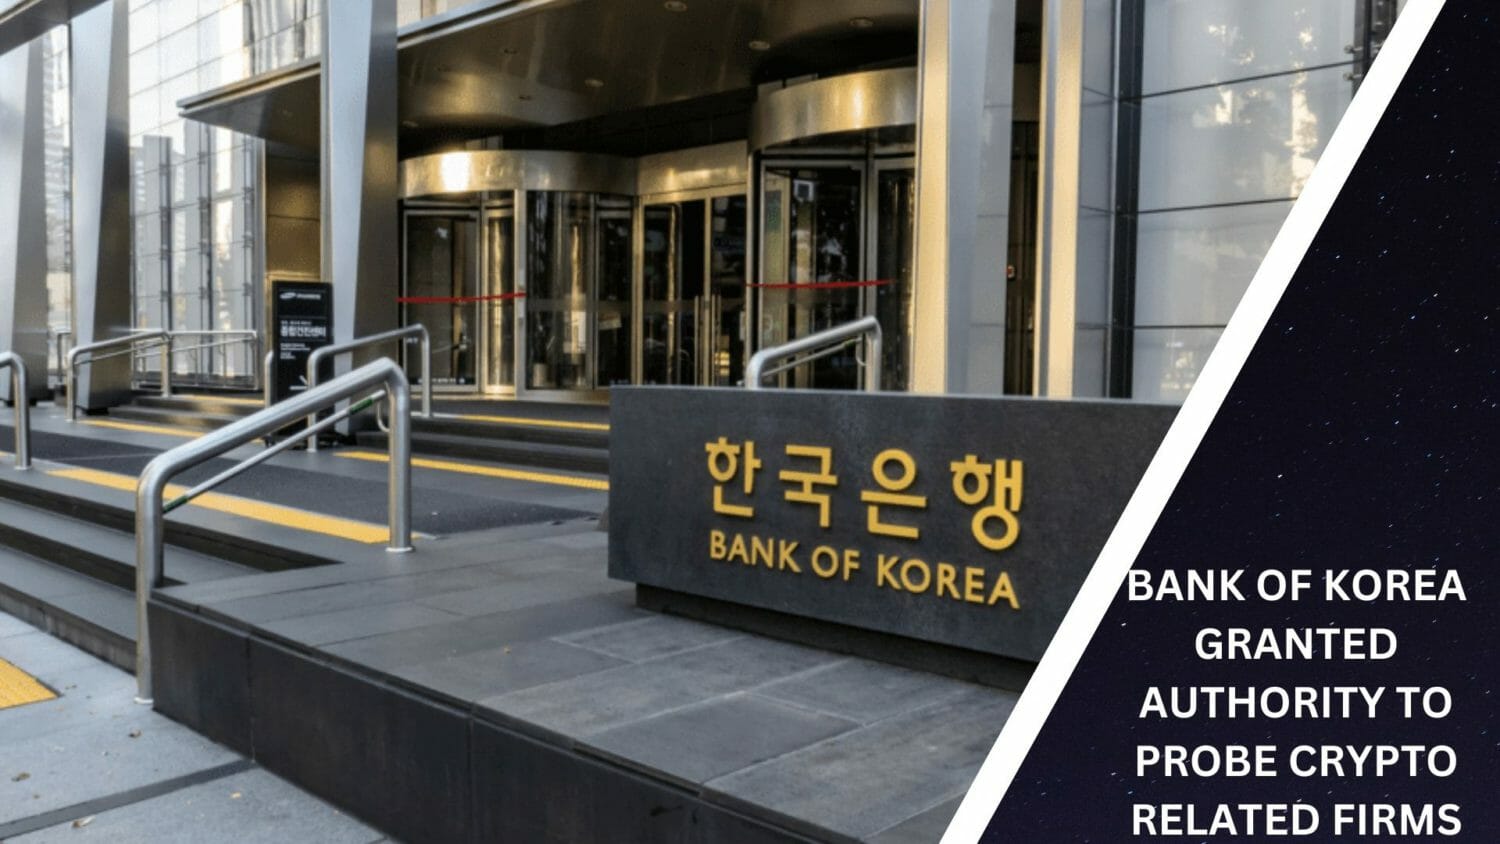 Bank Of Korea Granted Authority To Probe Crypto Related Firms